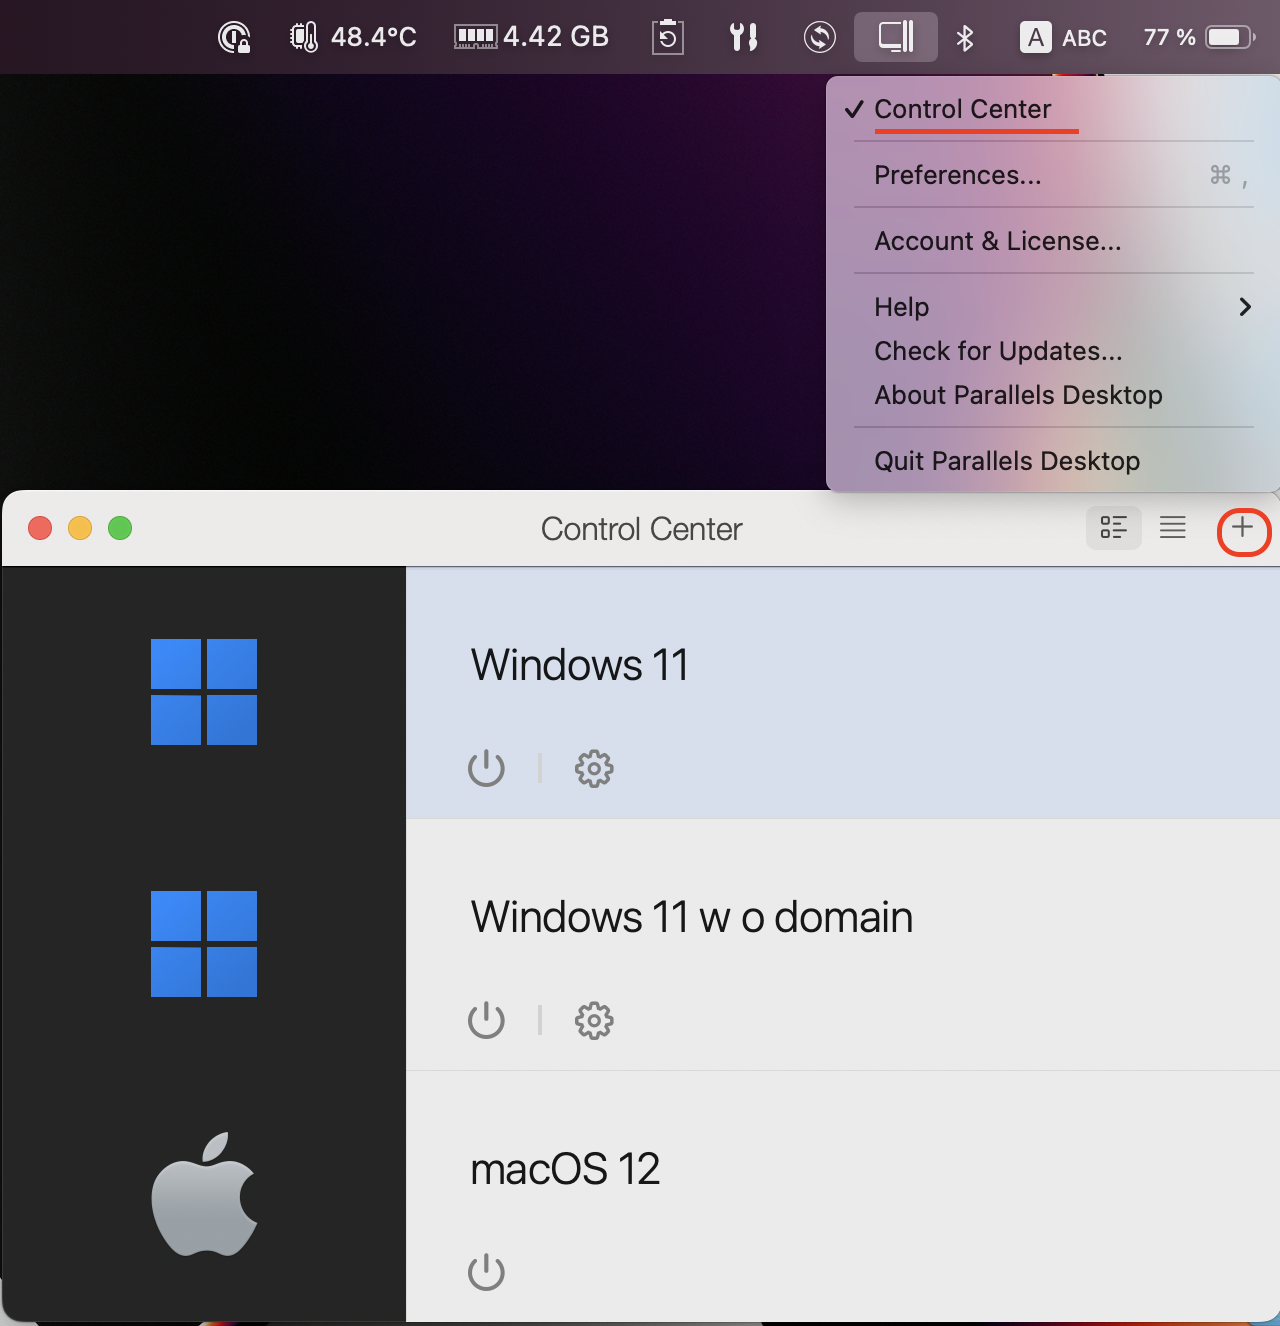 KB Parallels: Install Windows 11 on a Mac with Apple silicon